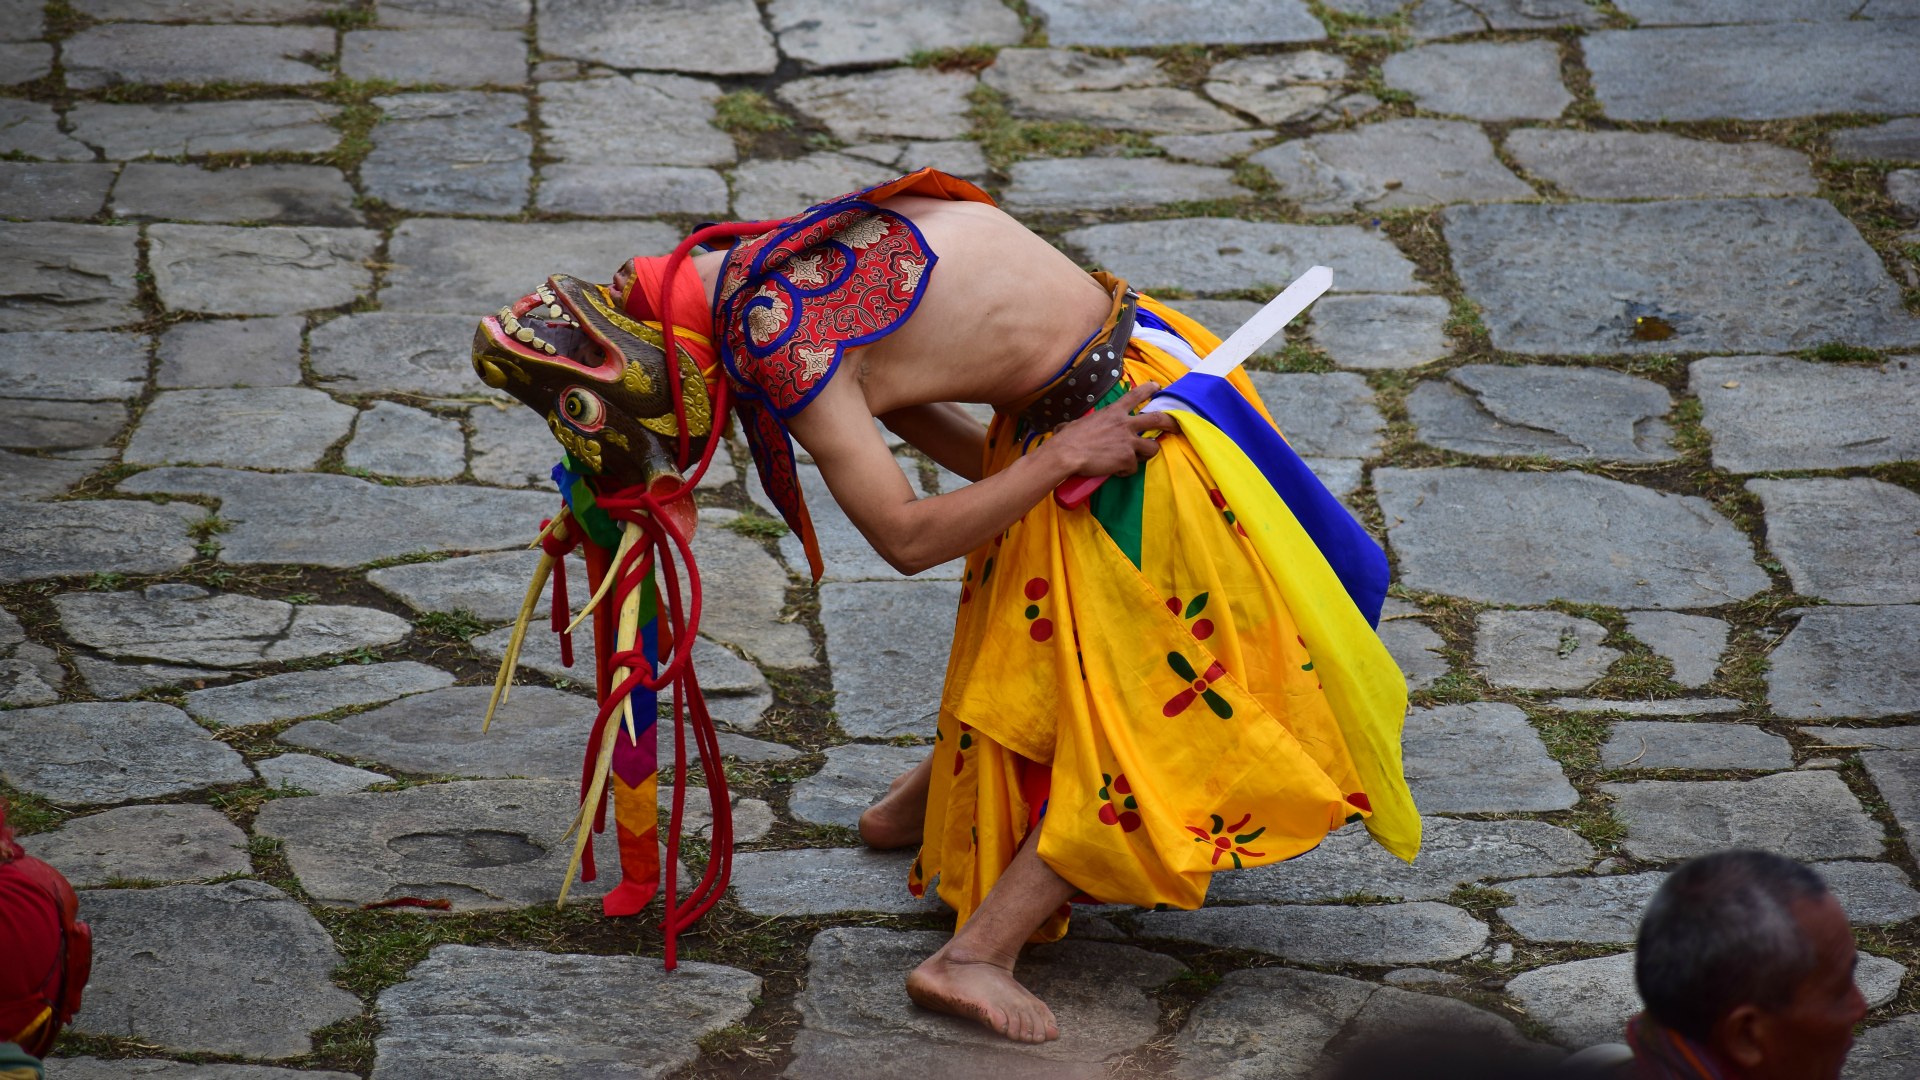 Dance of the Four Stags, Paro Festival